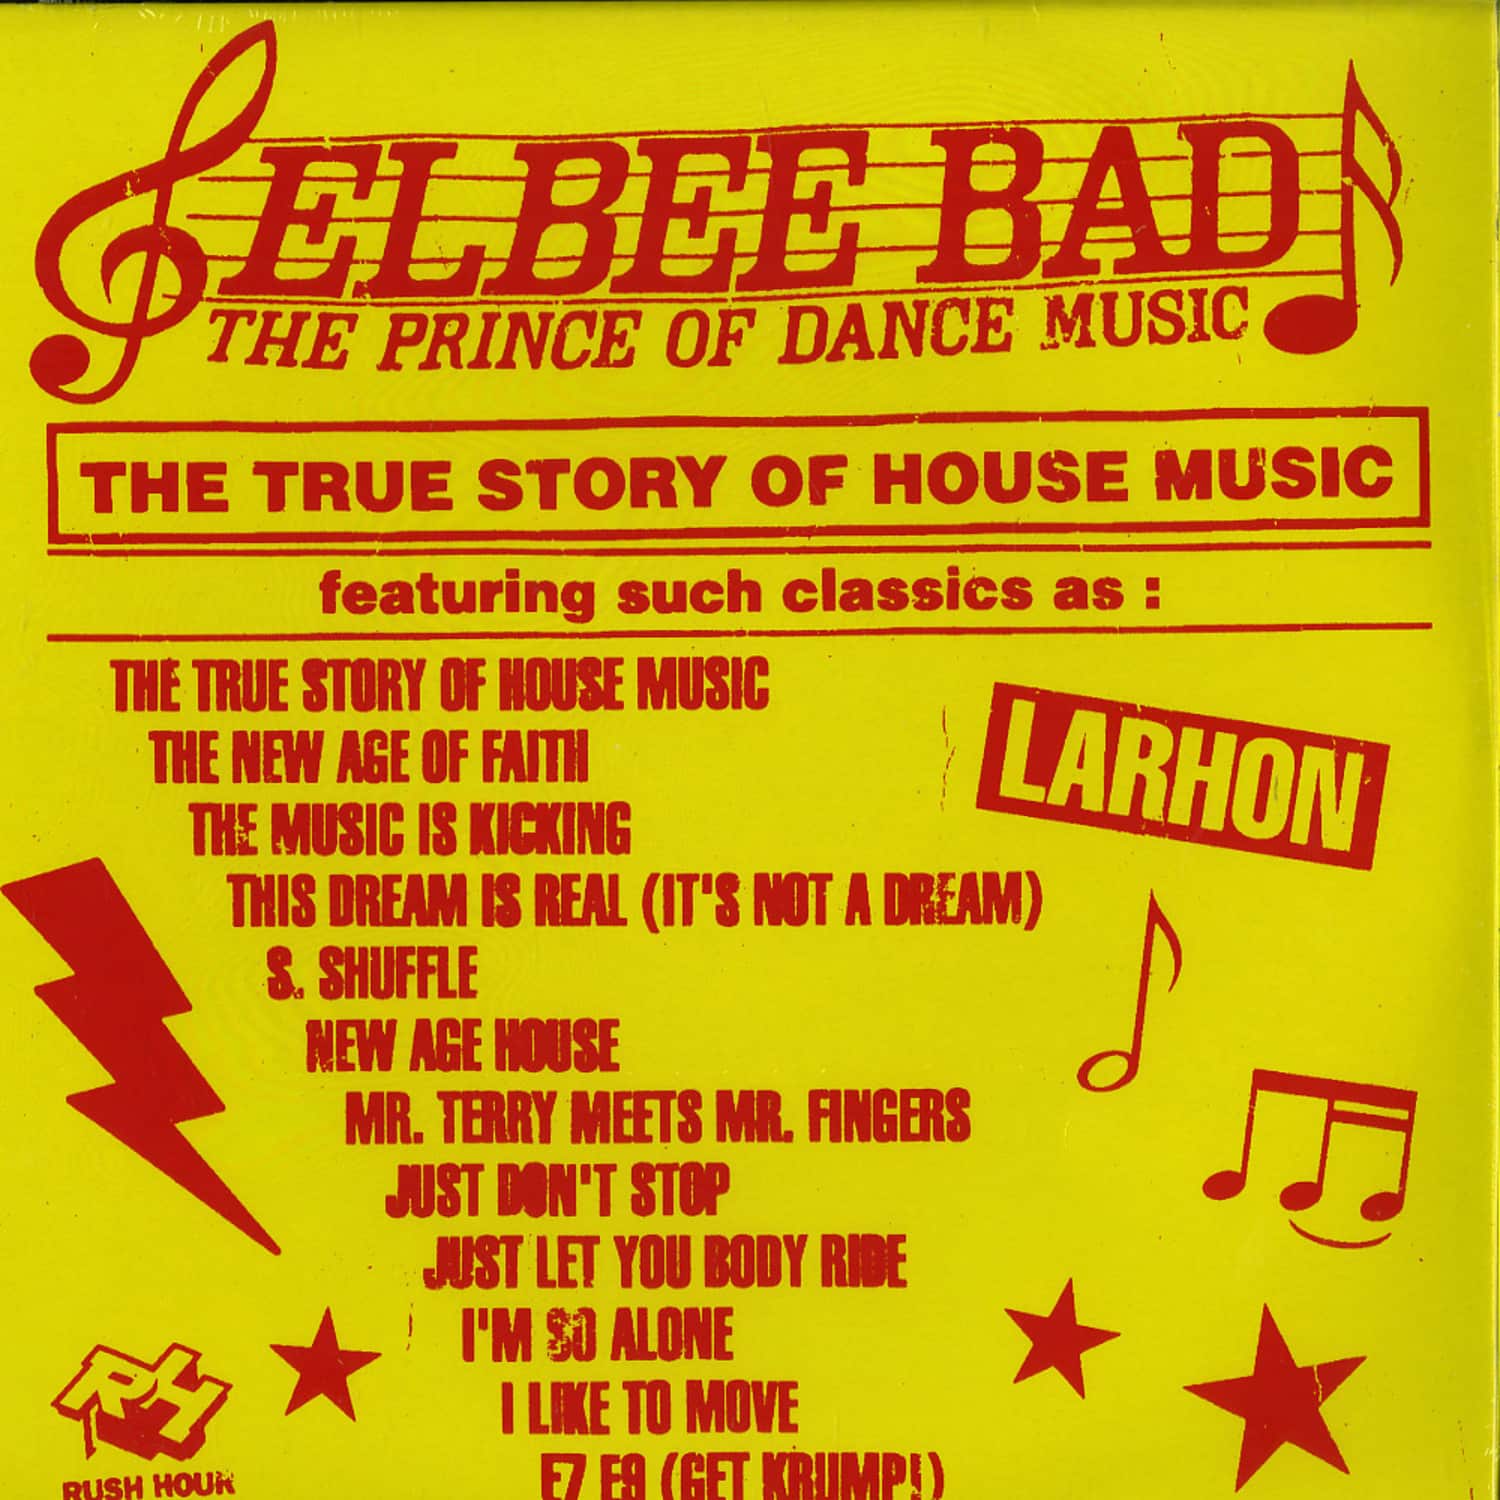 Elbee Bad - THE PRINCE OF DANCE MUSIC - THE TRUE STORY OF HOUSE MUSIC 